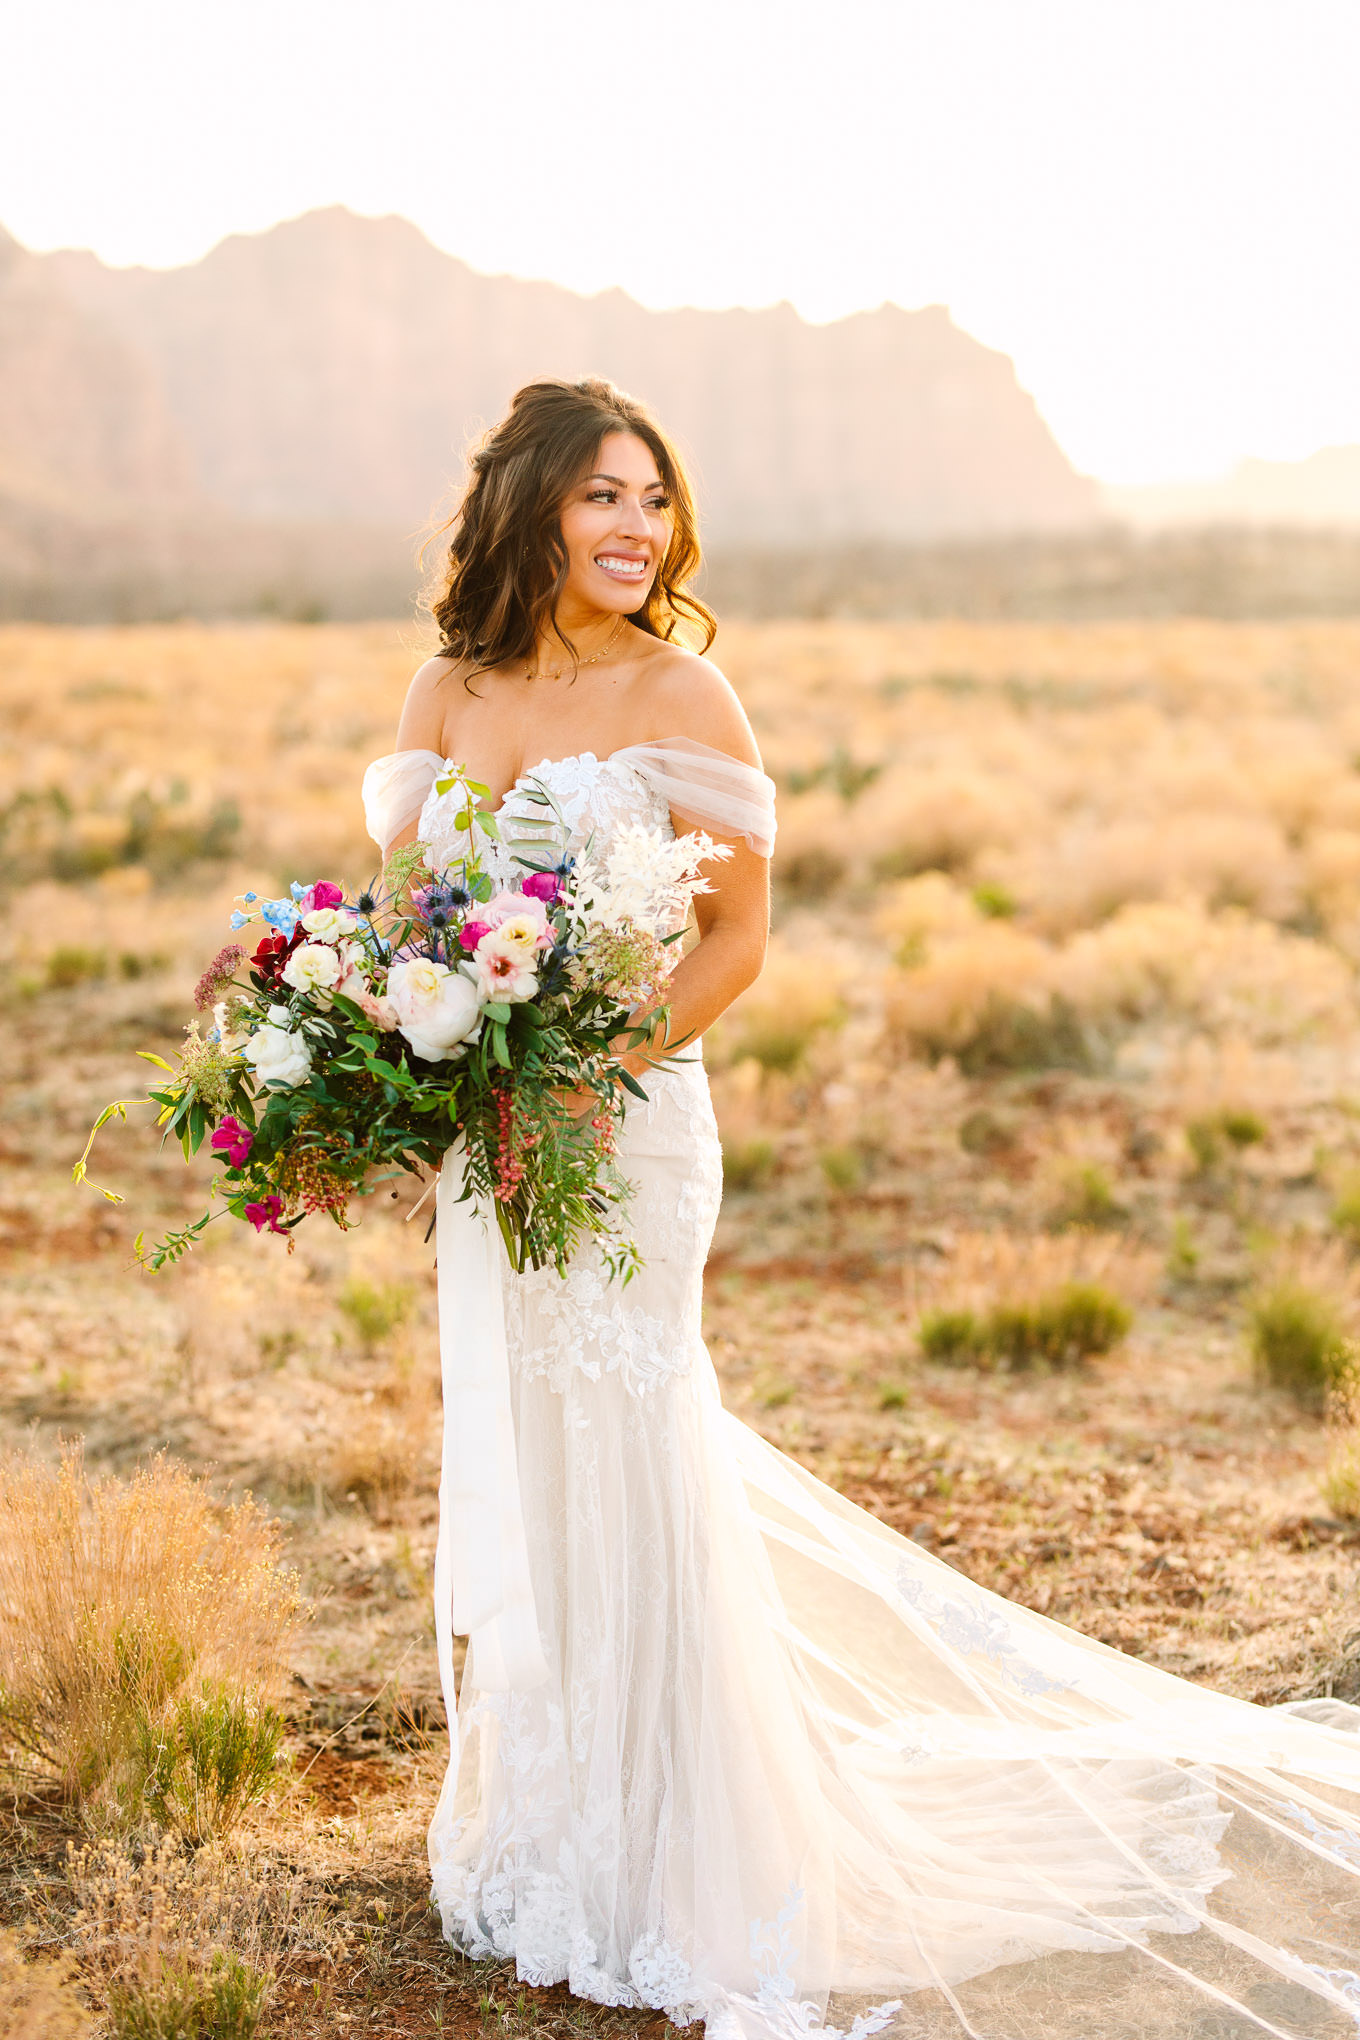 Bridal portrait with colorful bouquet | Zion Under Canvas camping elopement at sunrise | Colorful elopement photography | #utahelopement #zionelopement #zionwedding #undercanvaszion #sunriseelopement #adventureelopement  Source: Mary Costa Photography | Los Angeles